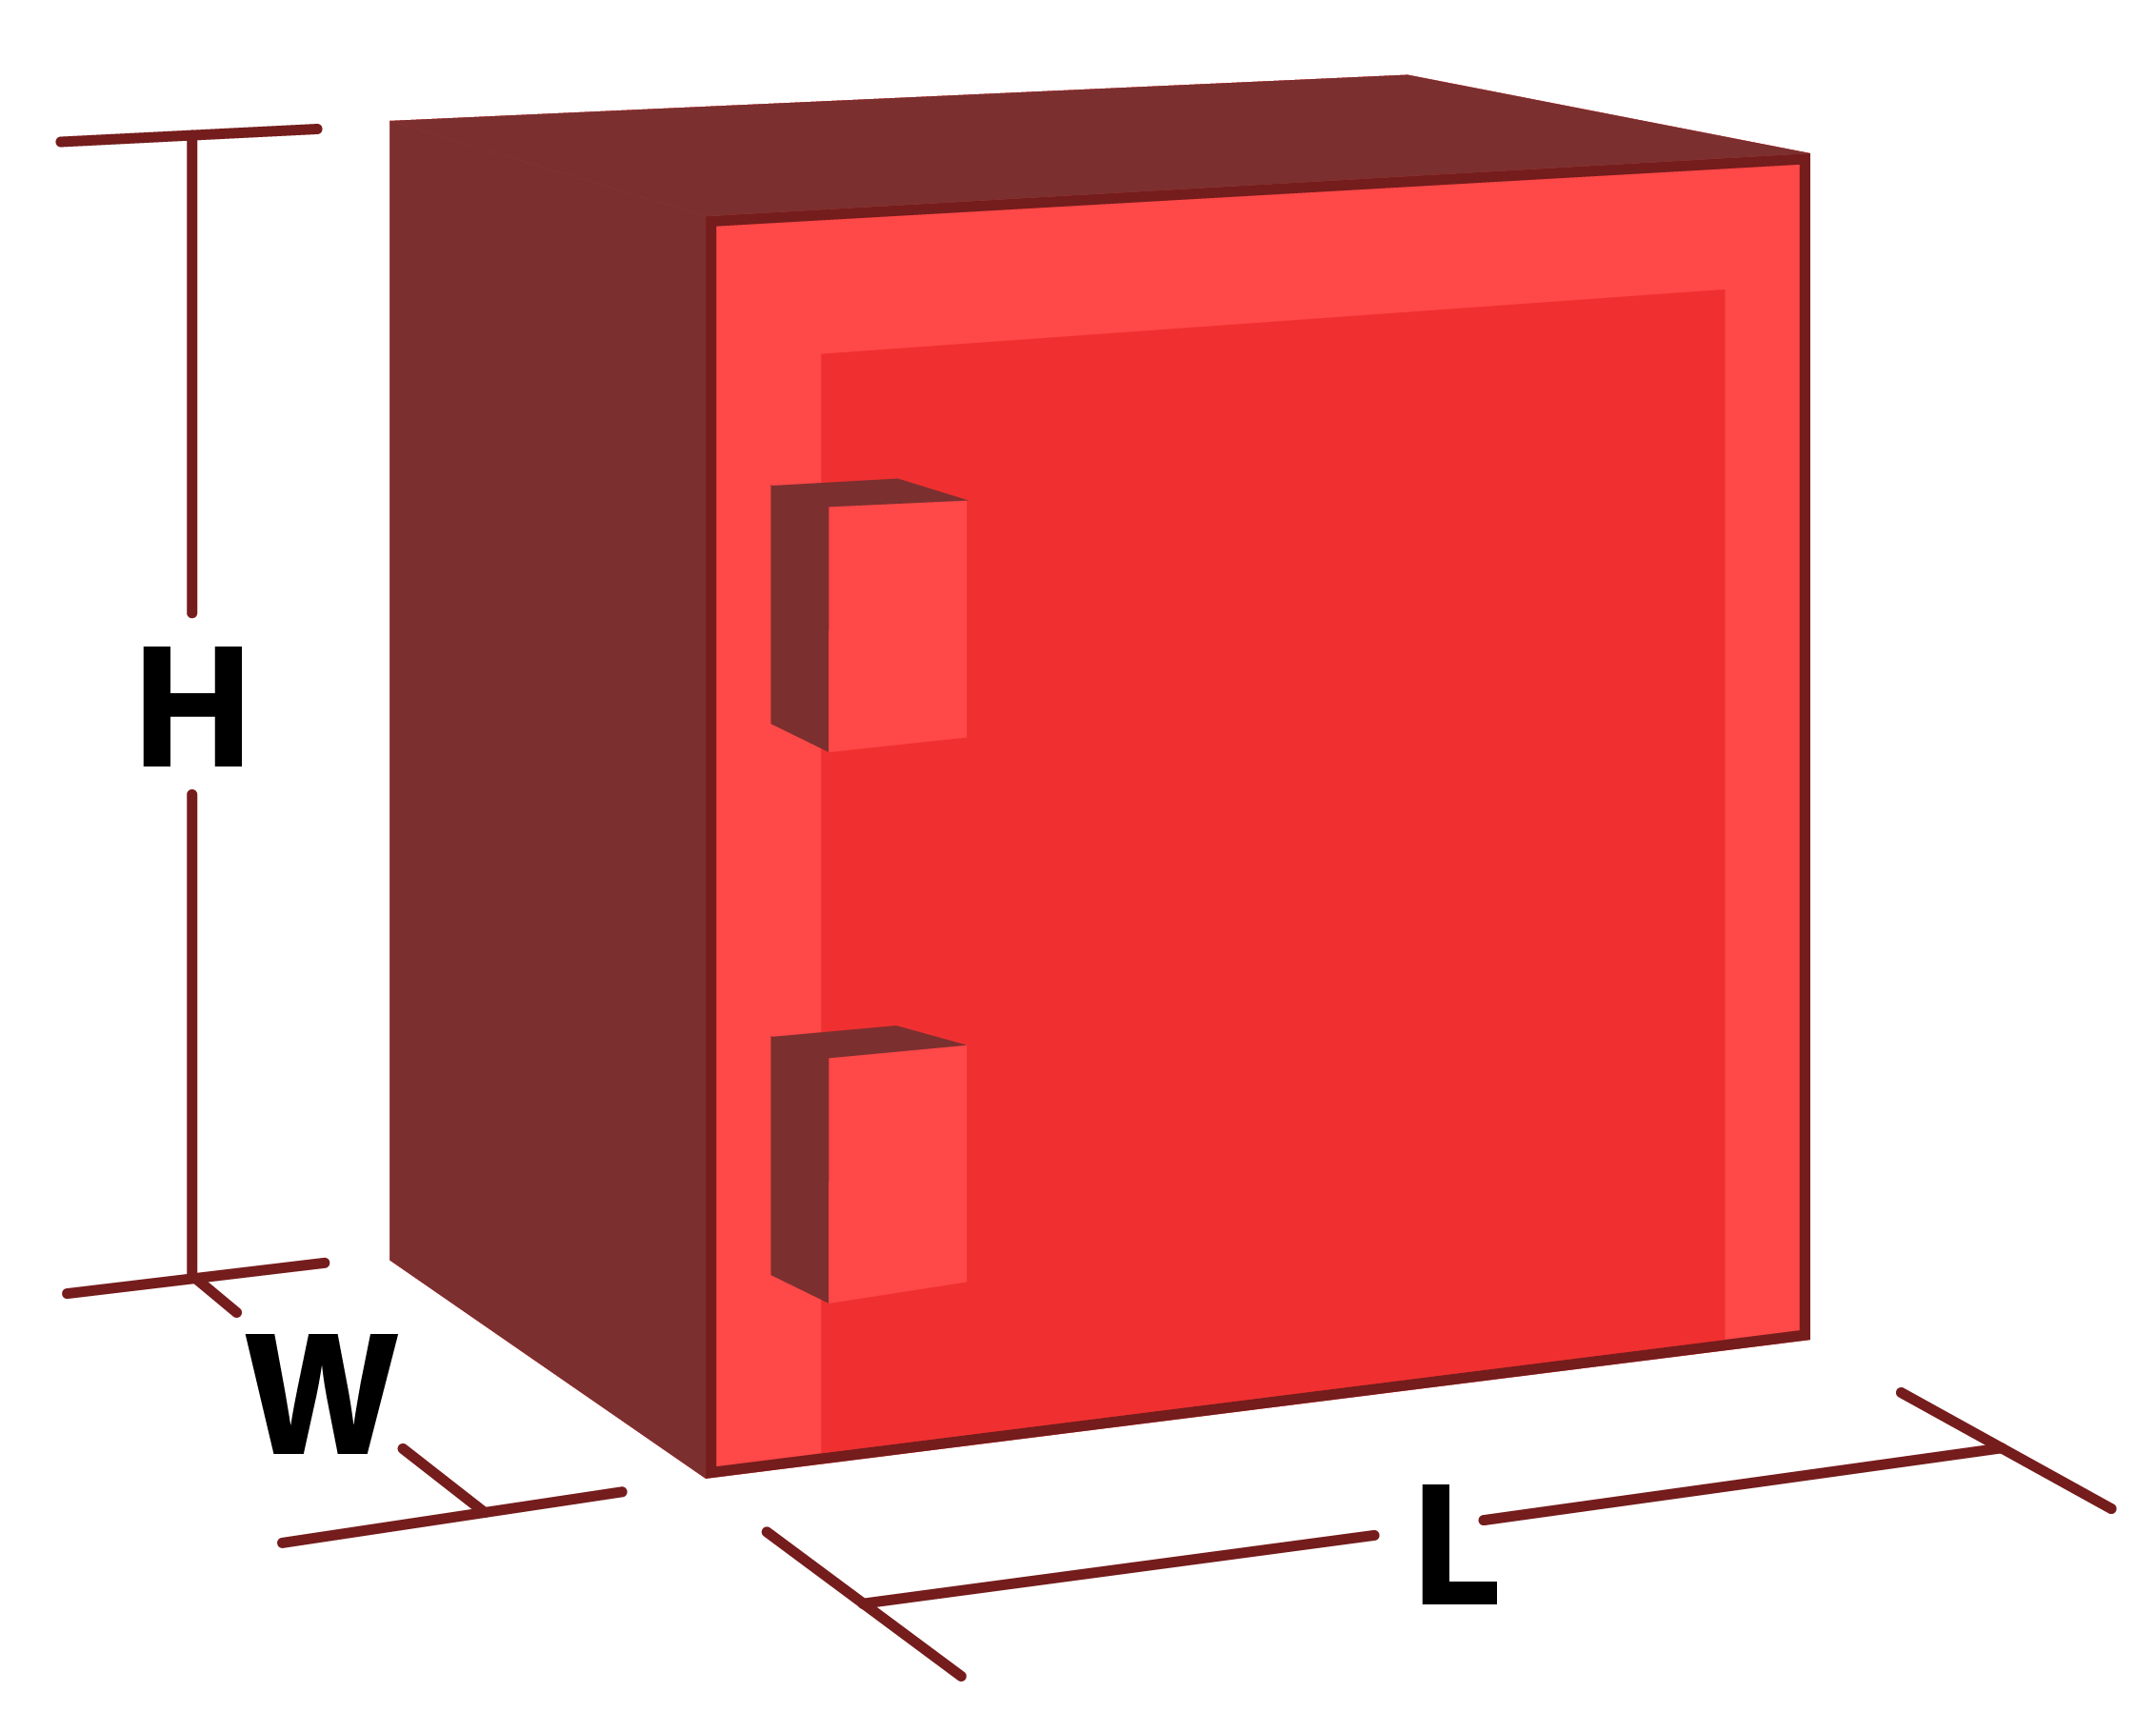 Diagram of a bright red explosive storage magazine with height, width, and length directions